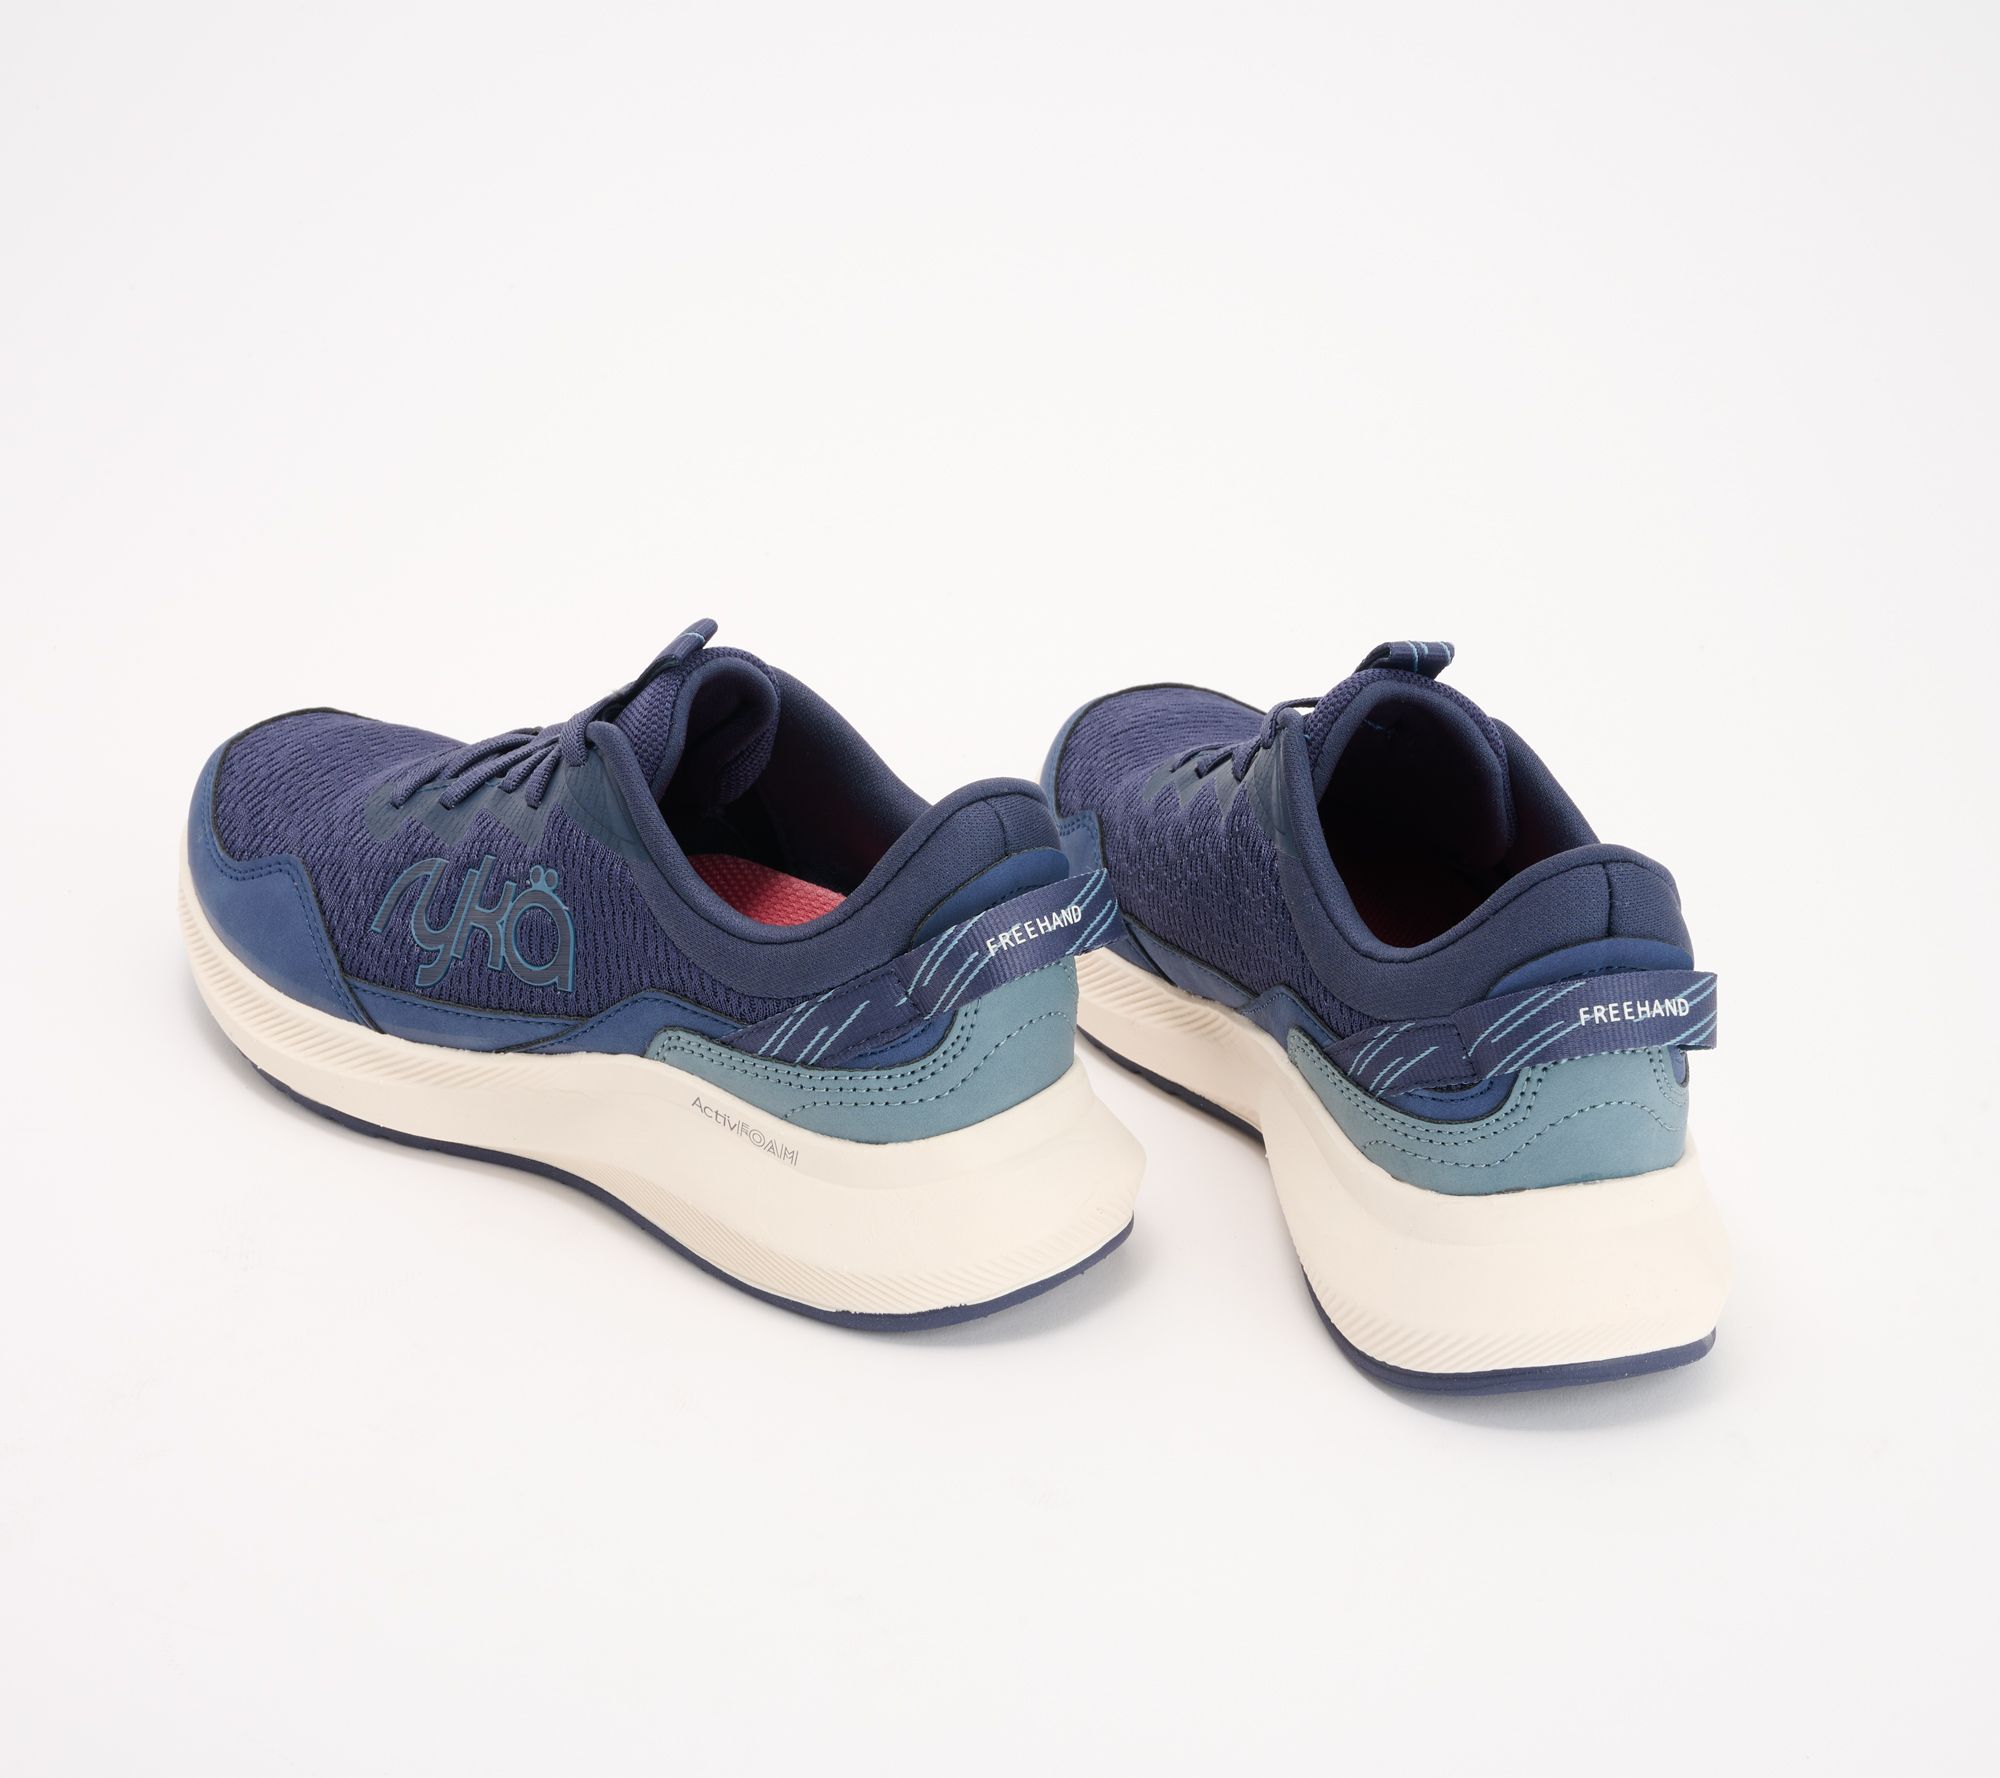 Ryka Walking Sneakers with ActivFoam - Freehand - QVC.com